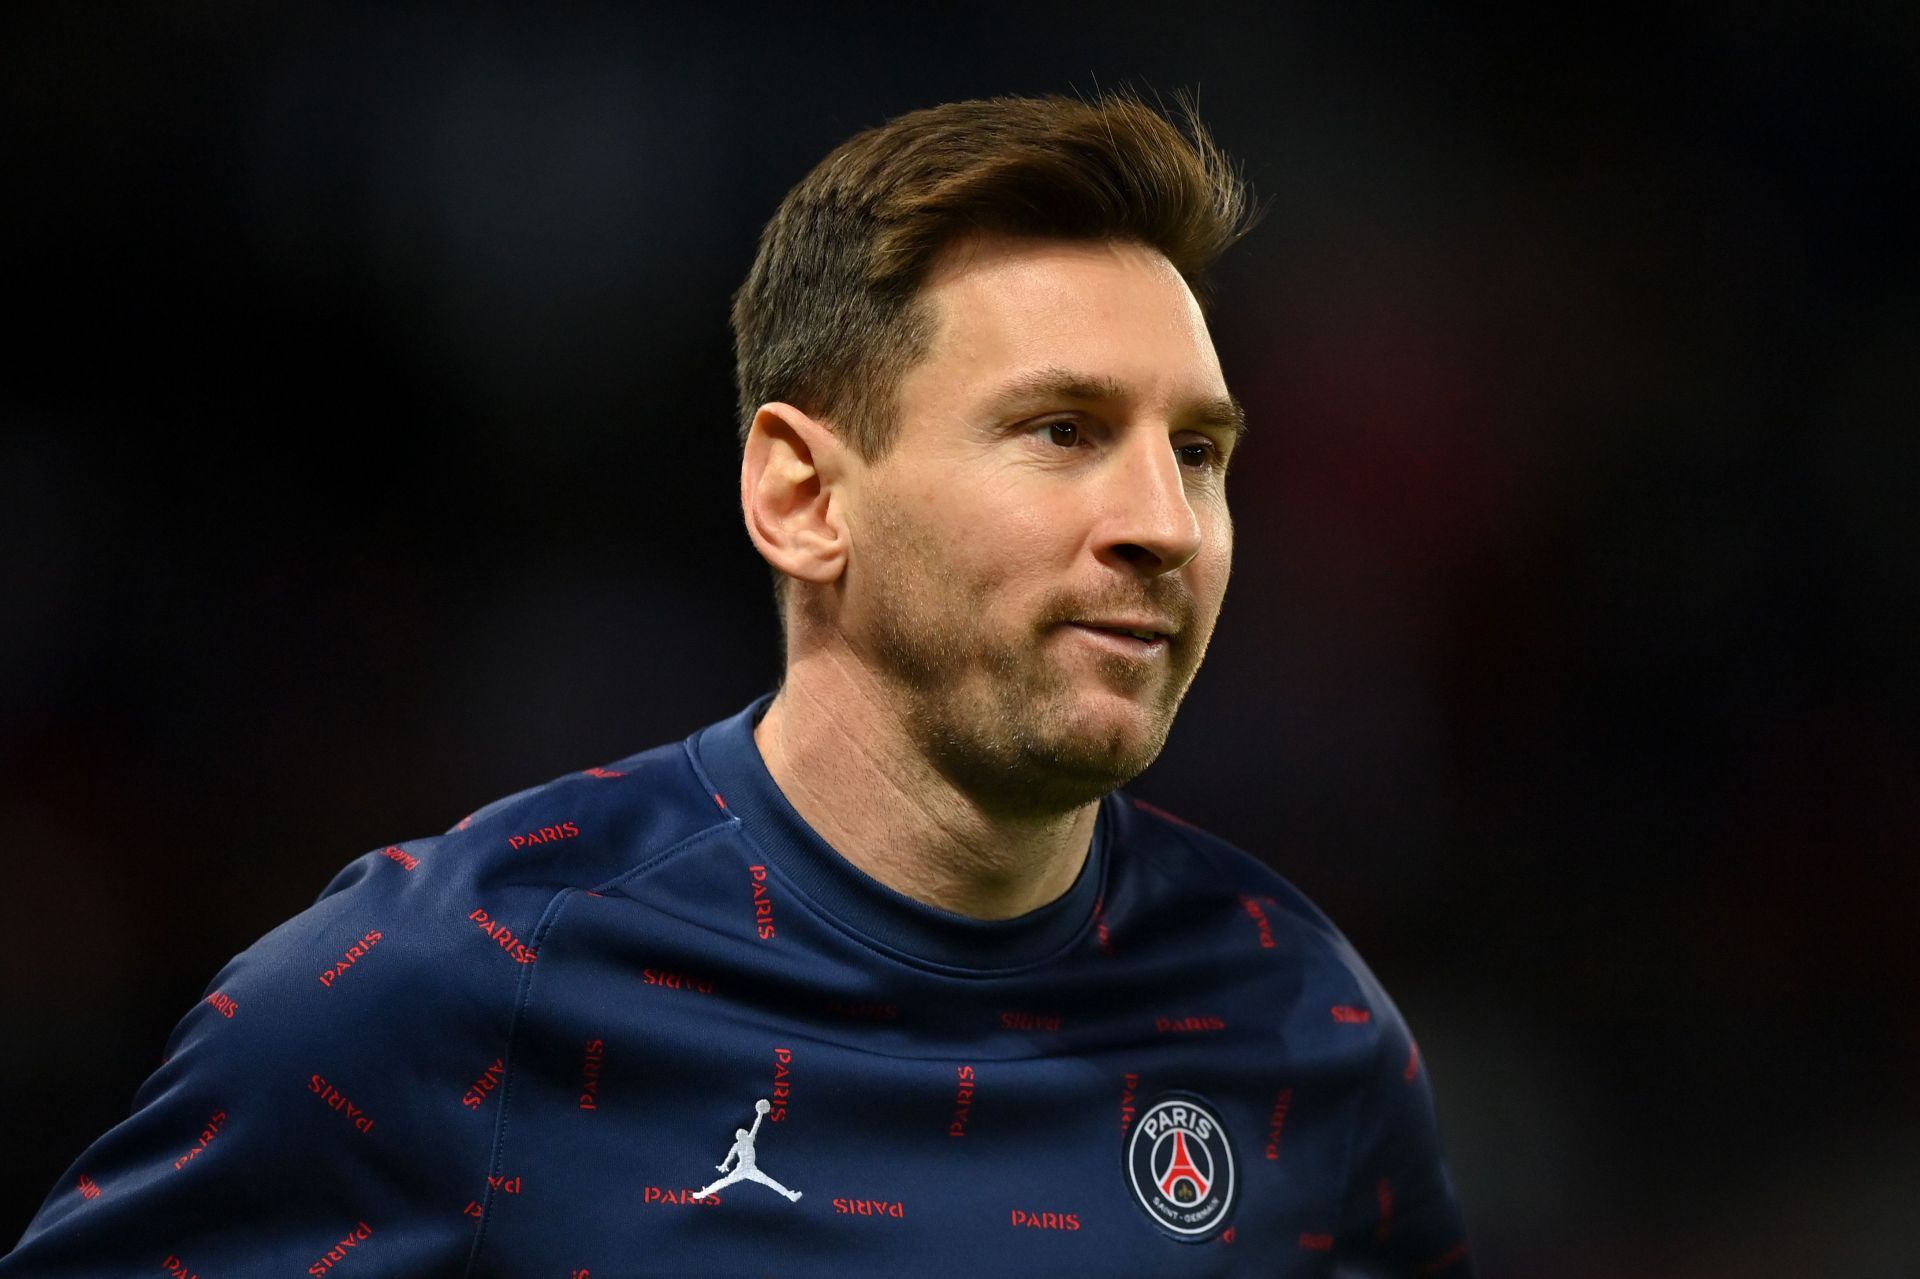 Lionel Messi is uncomfortable at PSG, and wants a return to Barcelona/